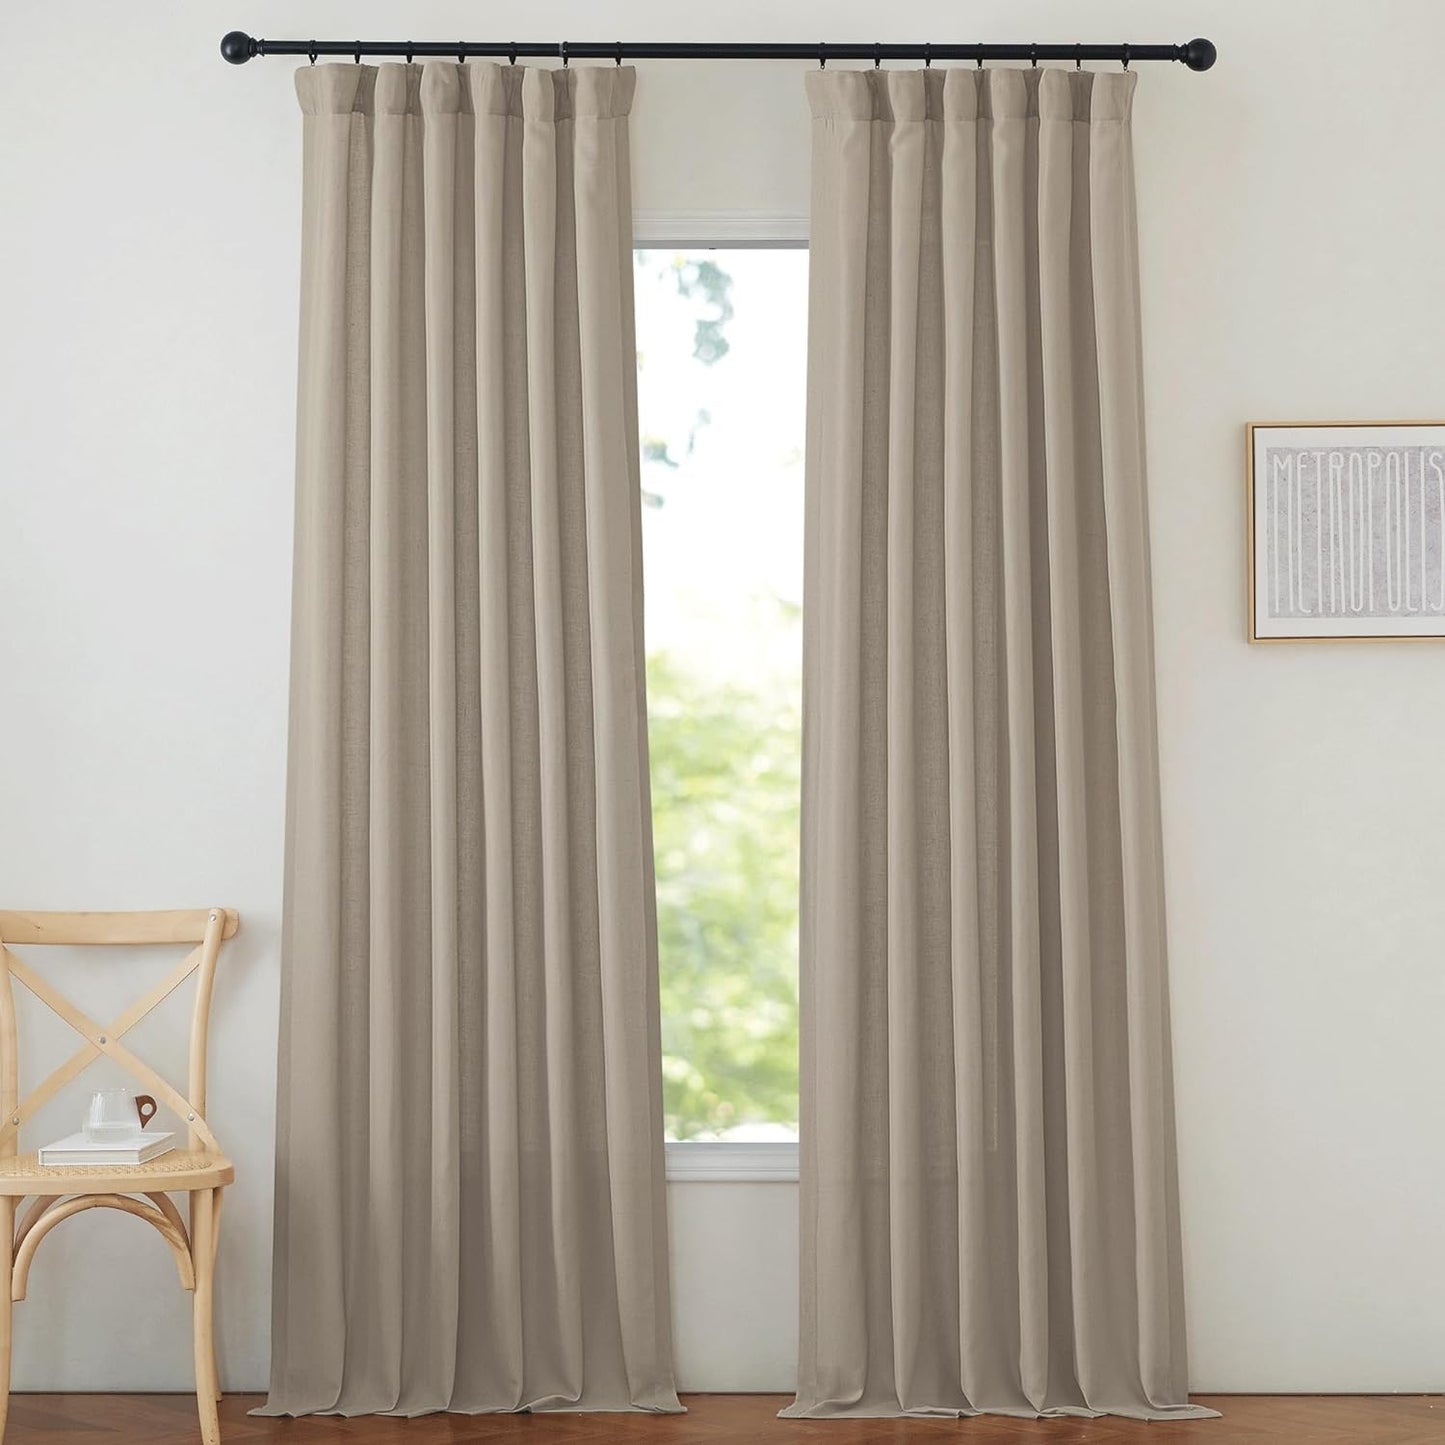 NICETOWN Taupe Thick Linen Curtains 96 Inches Long, Pinch Pleated Flax Linen Curtains Privacy Added Window Treatments with Light Filtering Drapes for Bedroom/Living Room, W50 X L96, 2 Panels  NICETOWN Taupe W50 X L90 